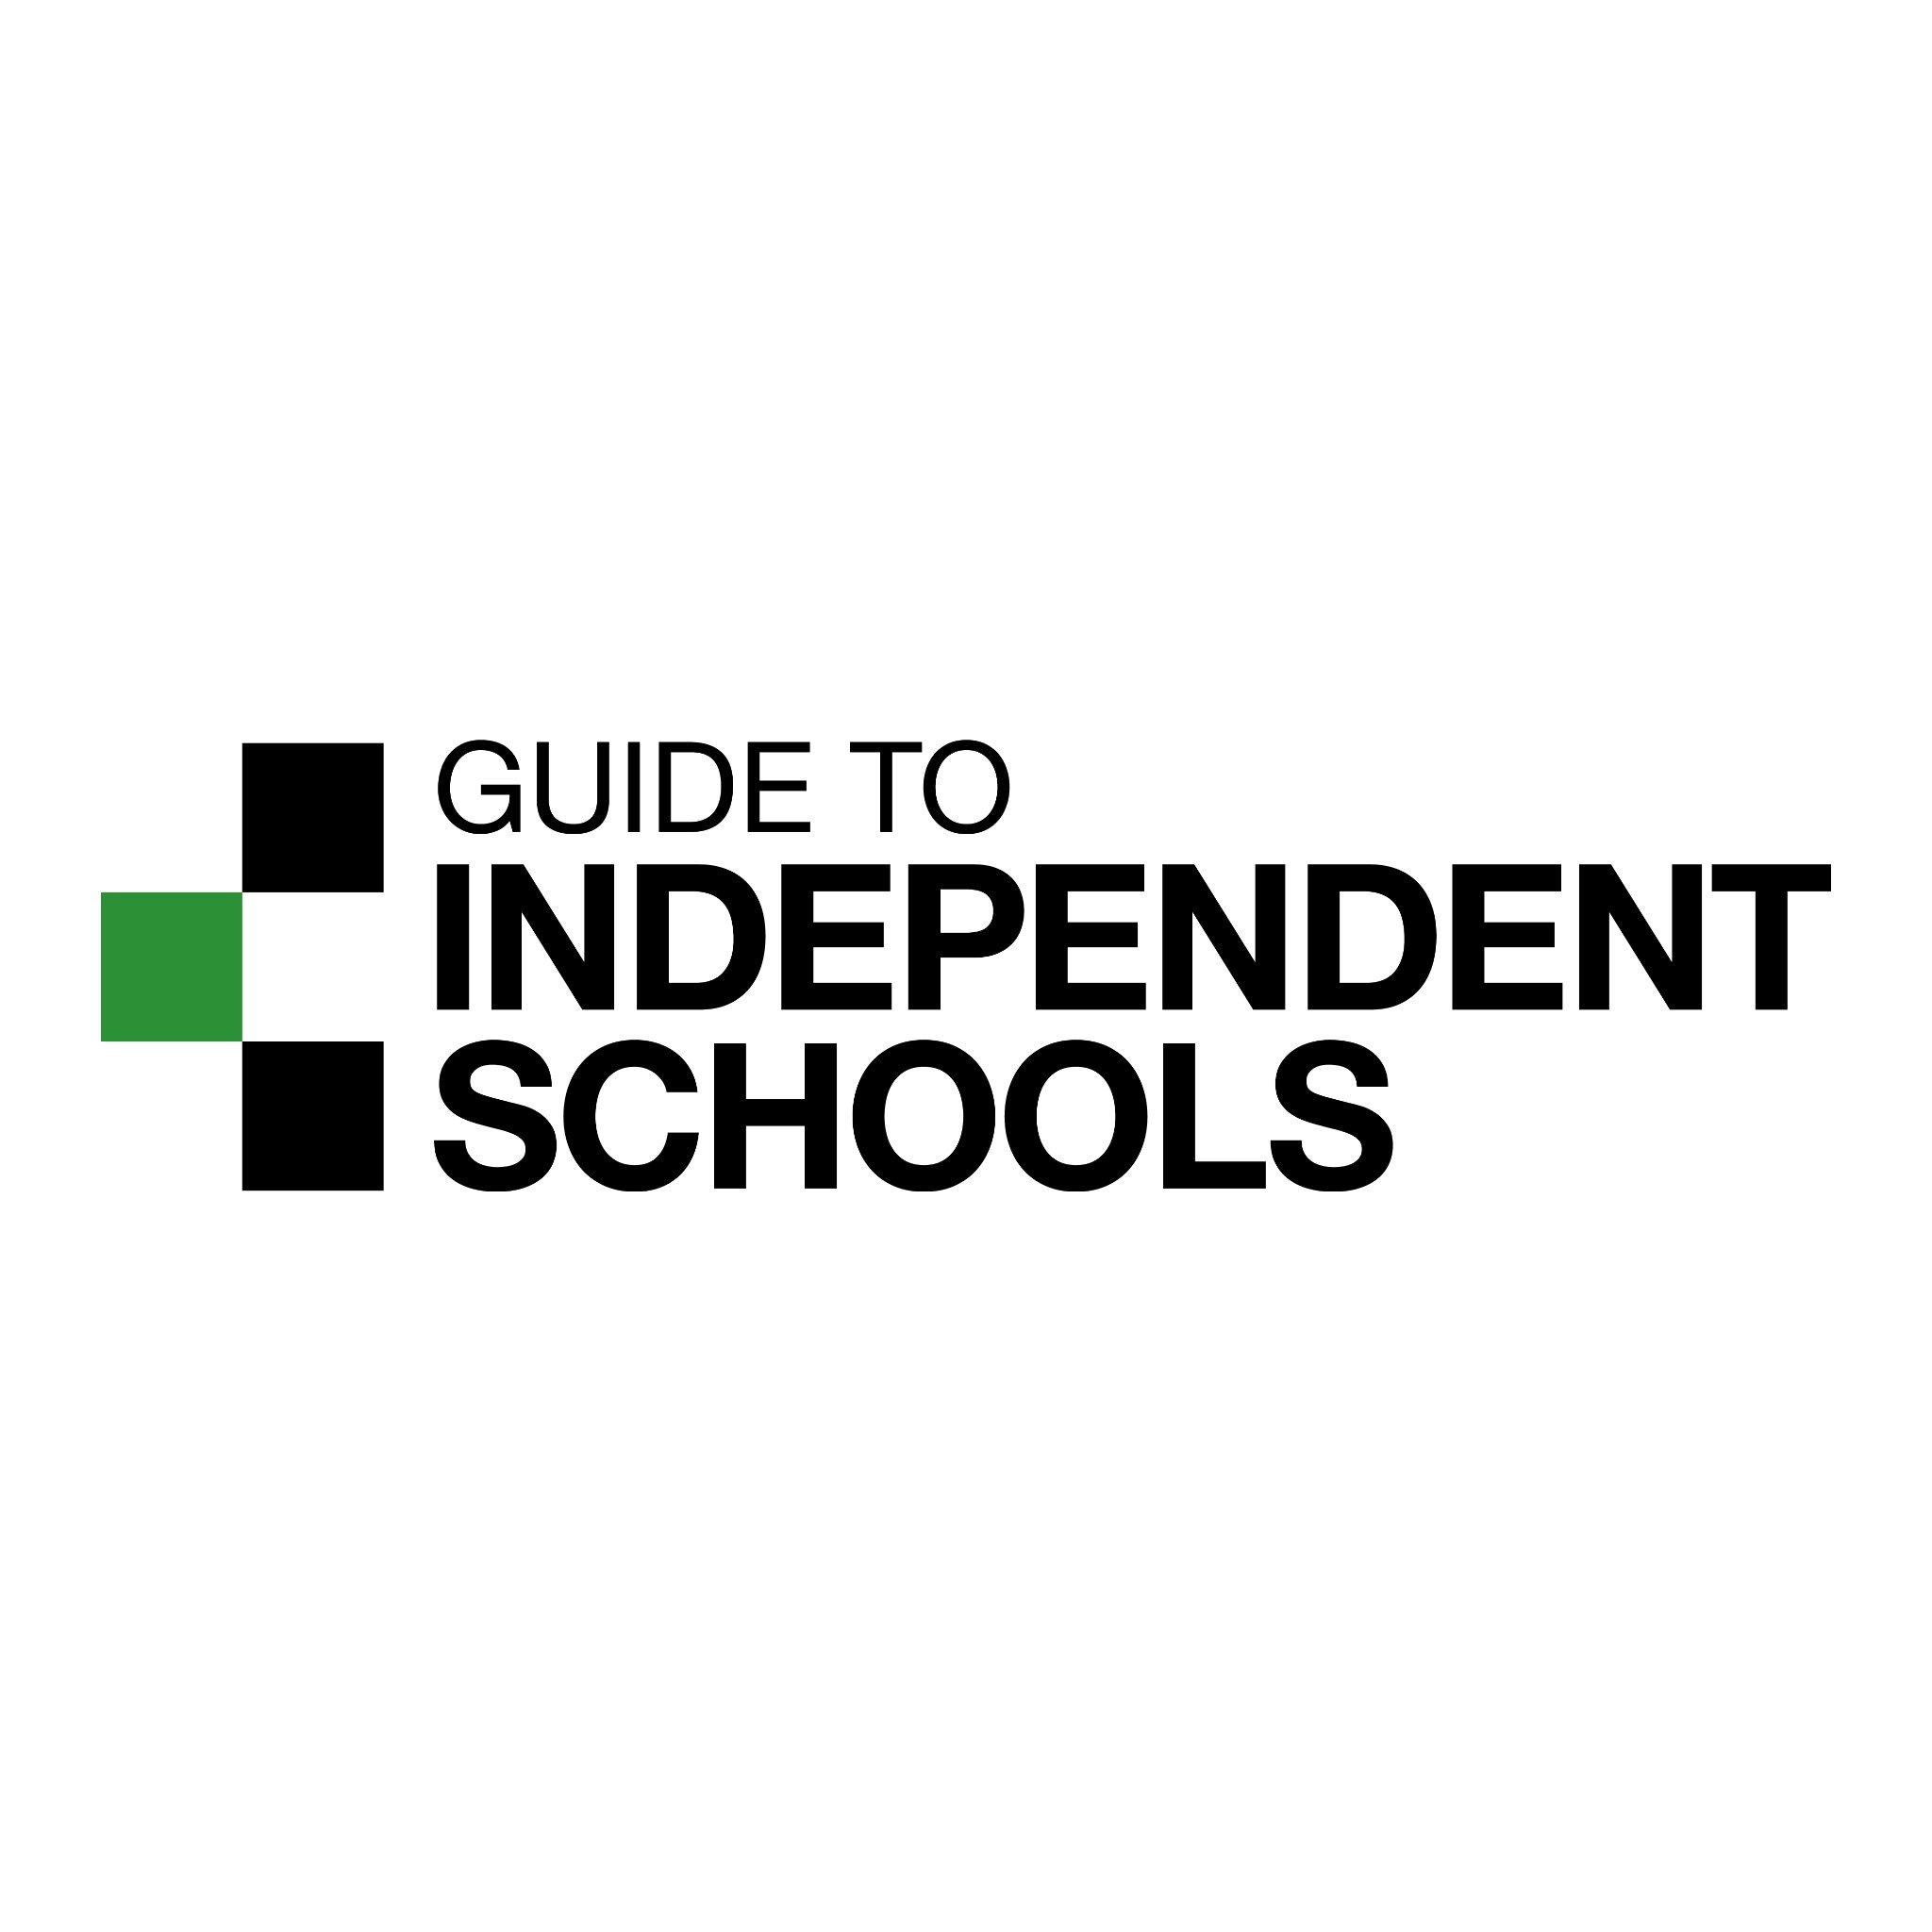 Our aim is to help parents to locate the best independent school for their child!

To share your news stories please email press@guidetoindependentschools.com